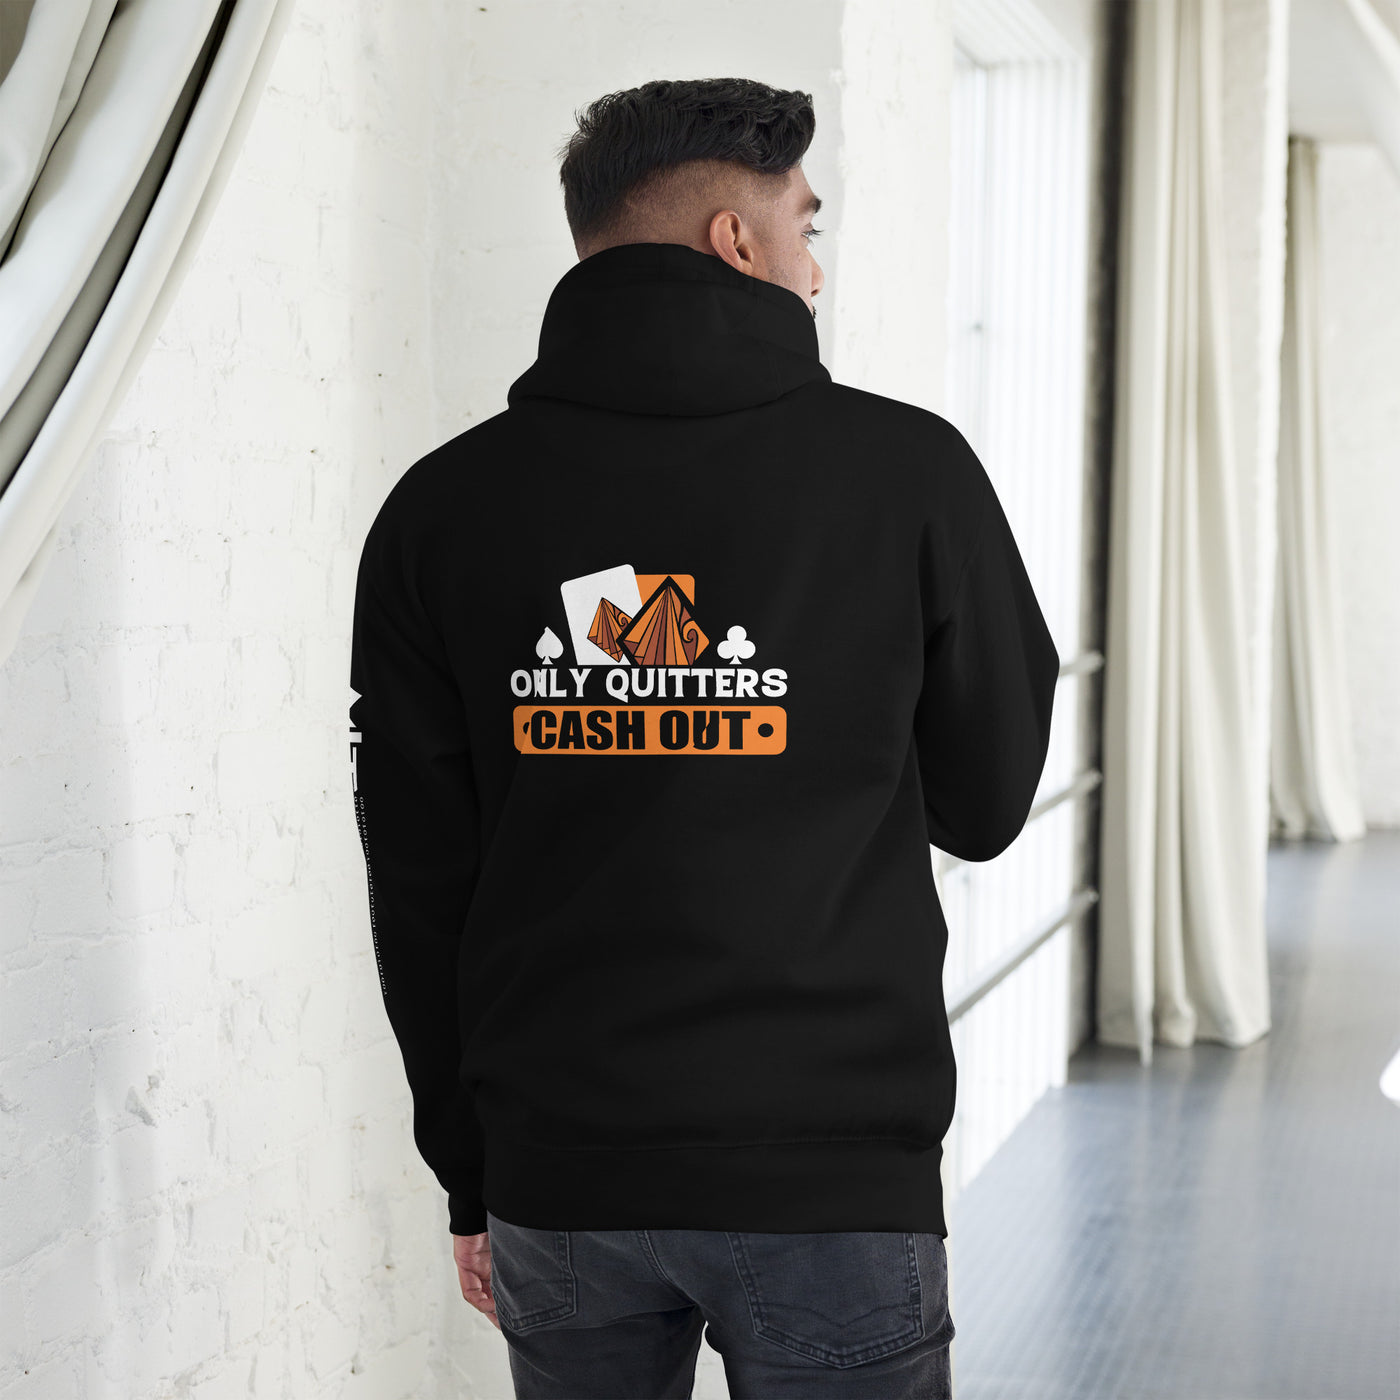 Only Quitters Cash Out - Unisex Hoodie